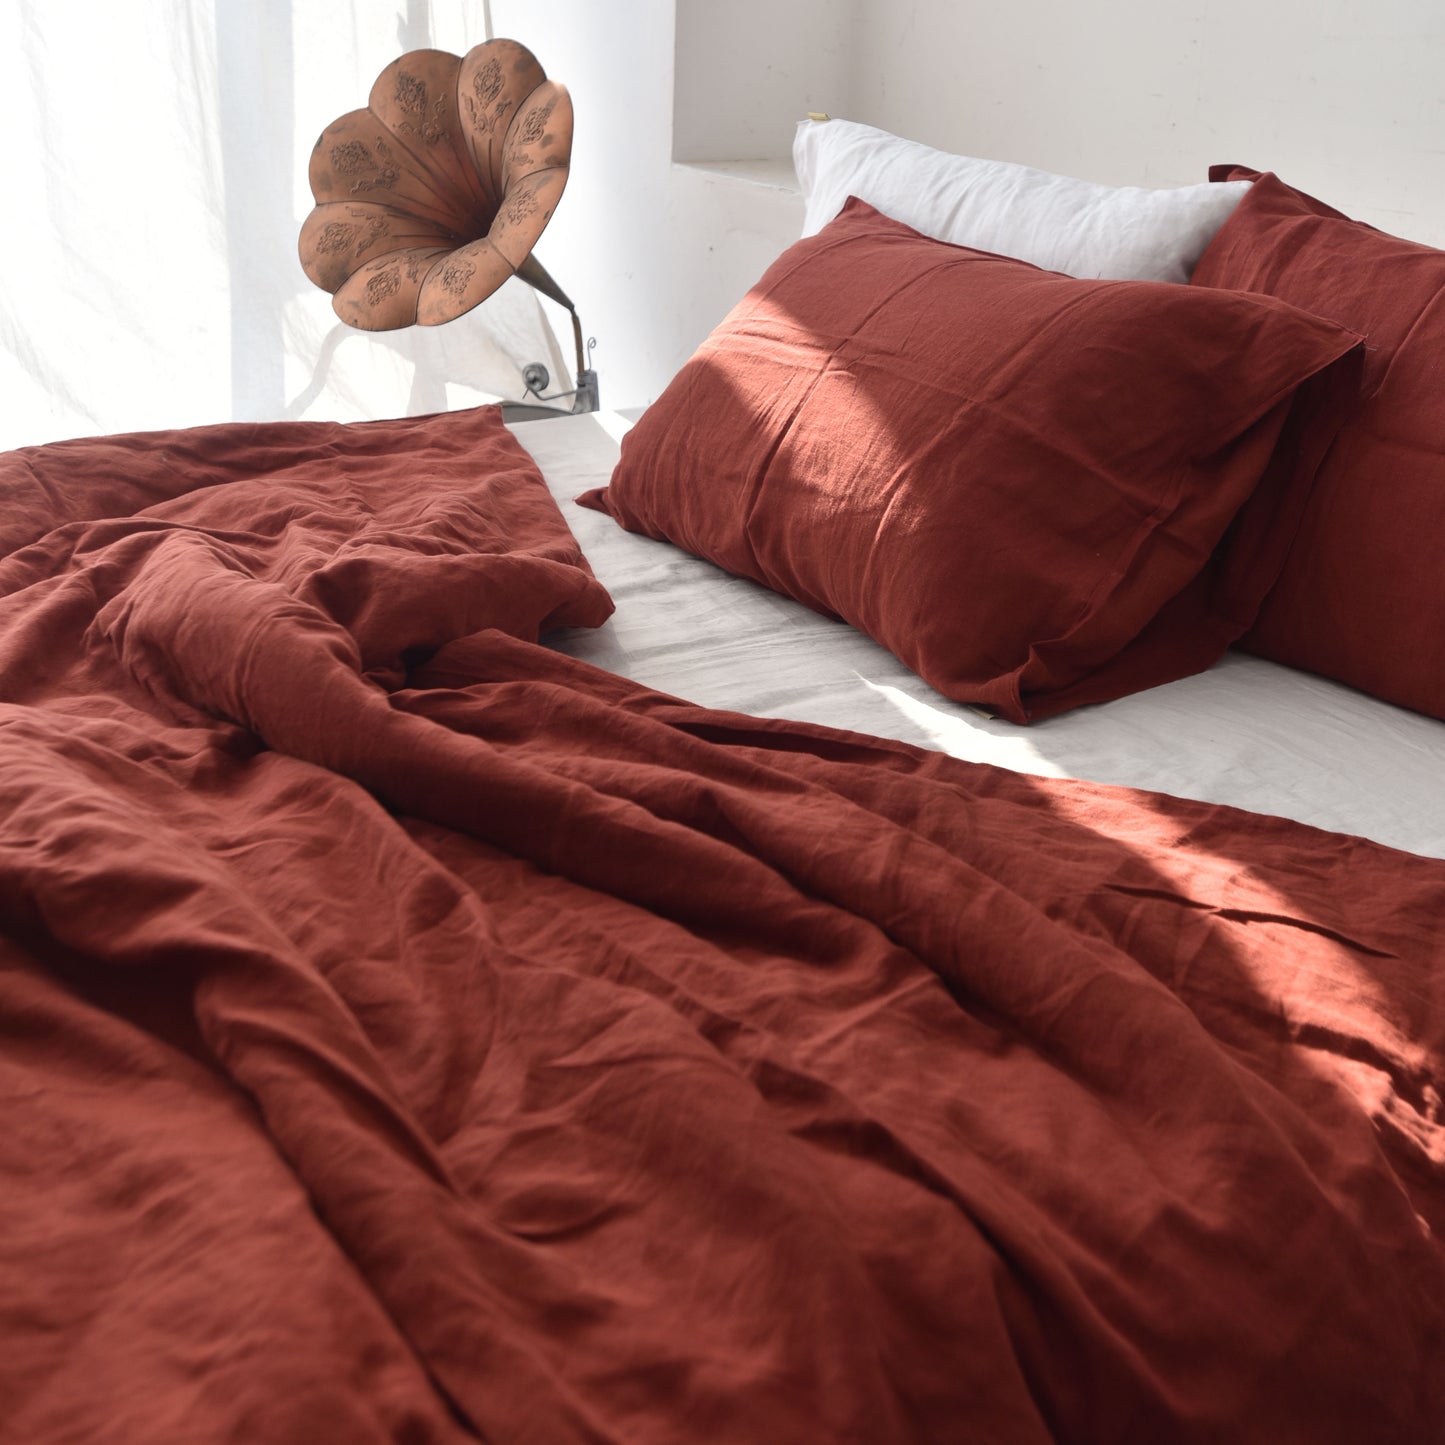 Red French Linen Bedding Sets (4 pieces) - Plain Dyeing